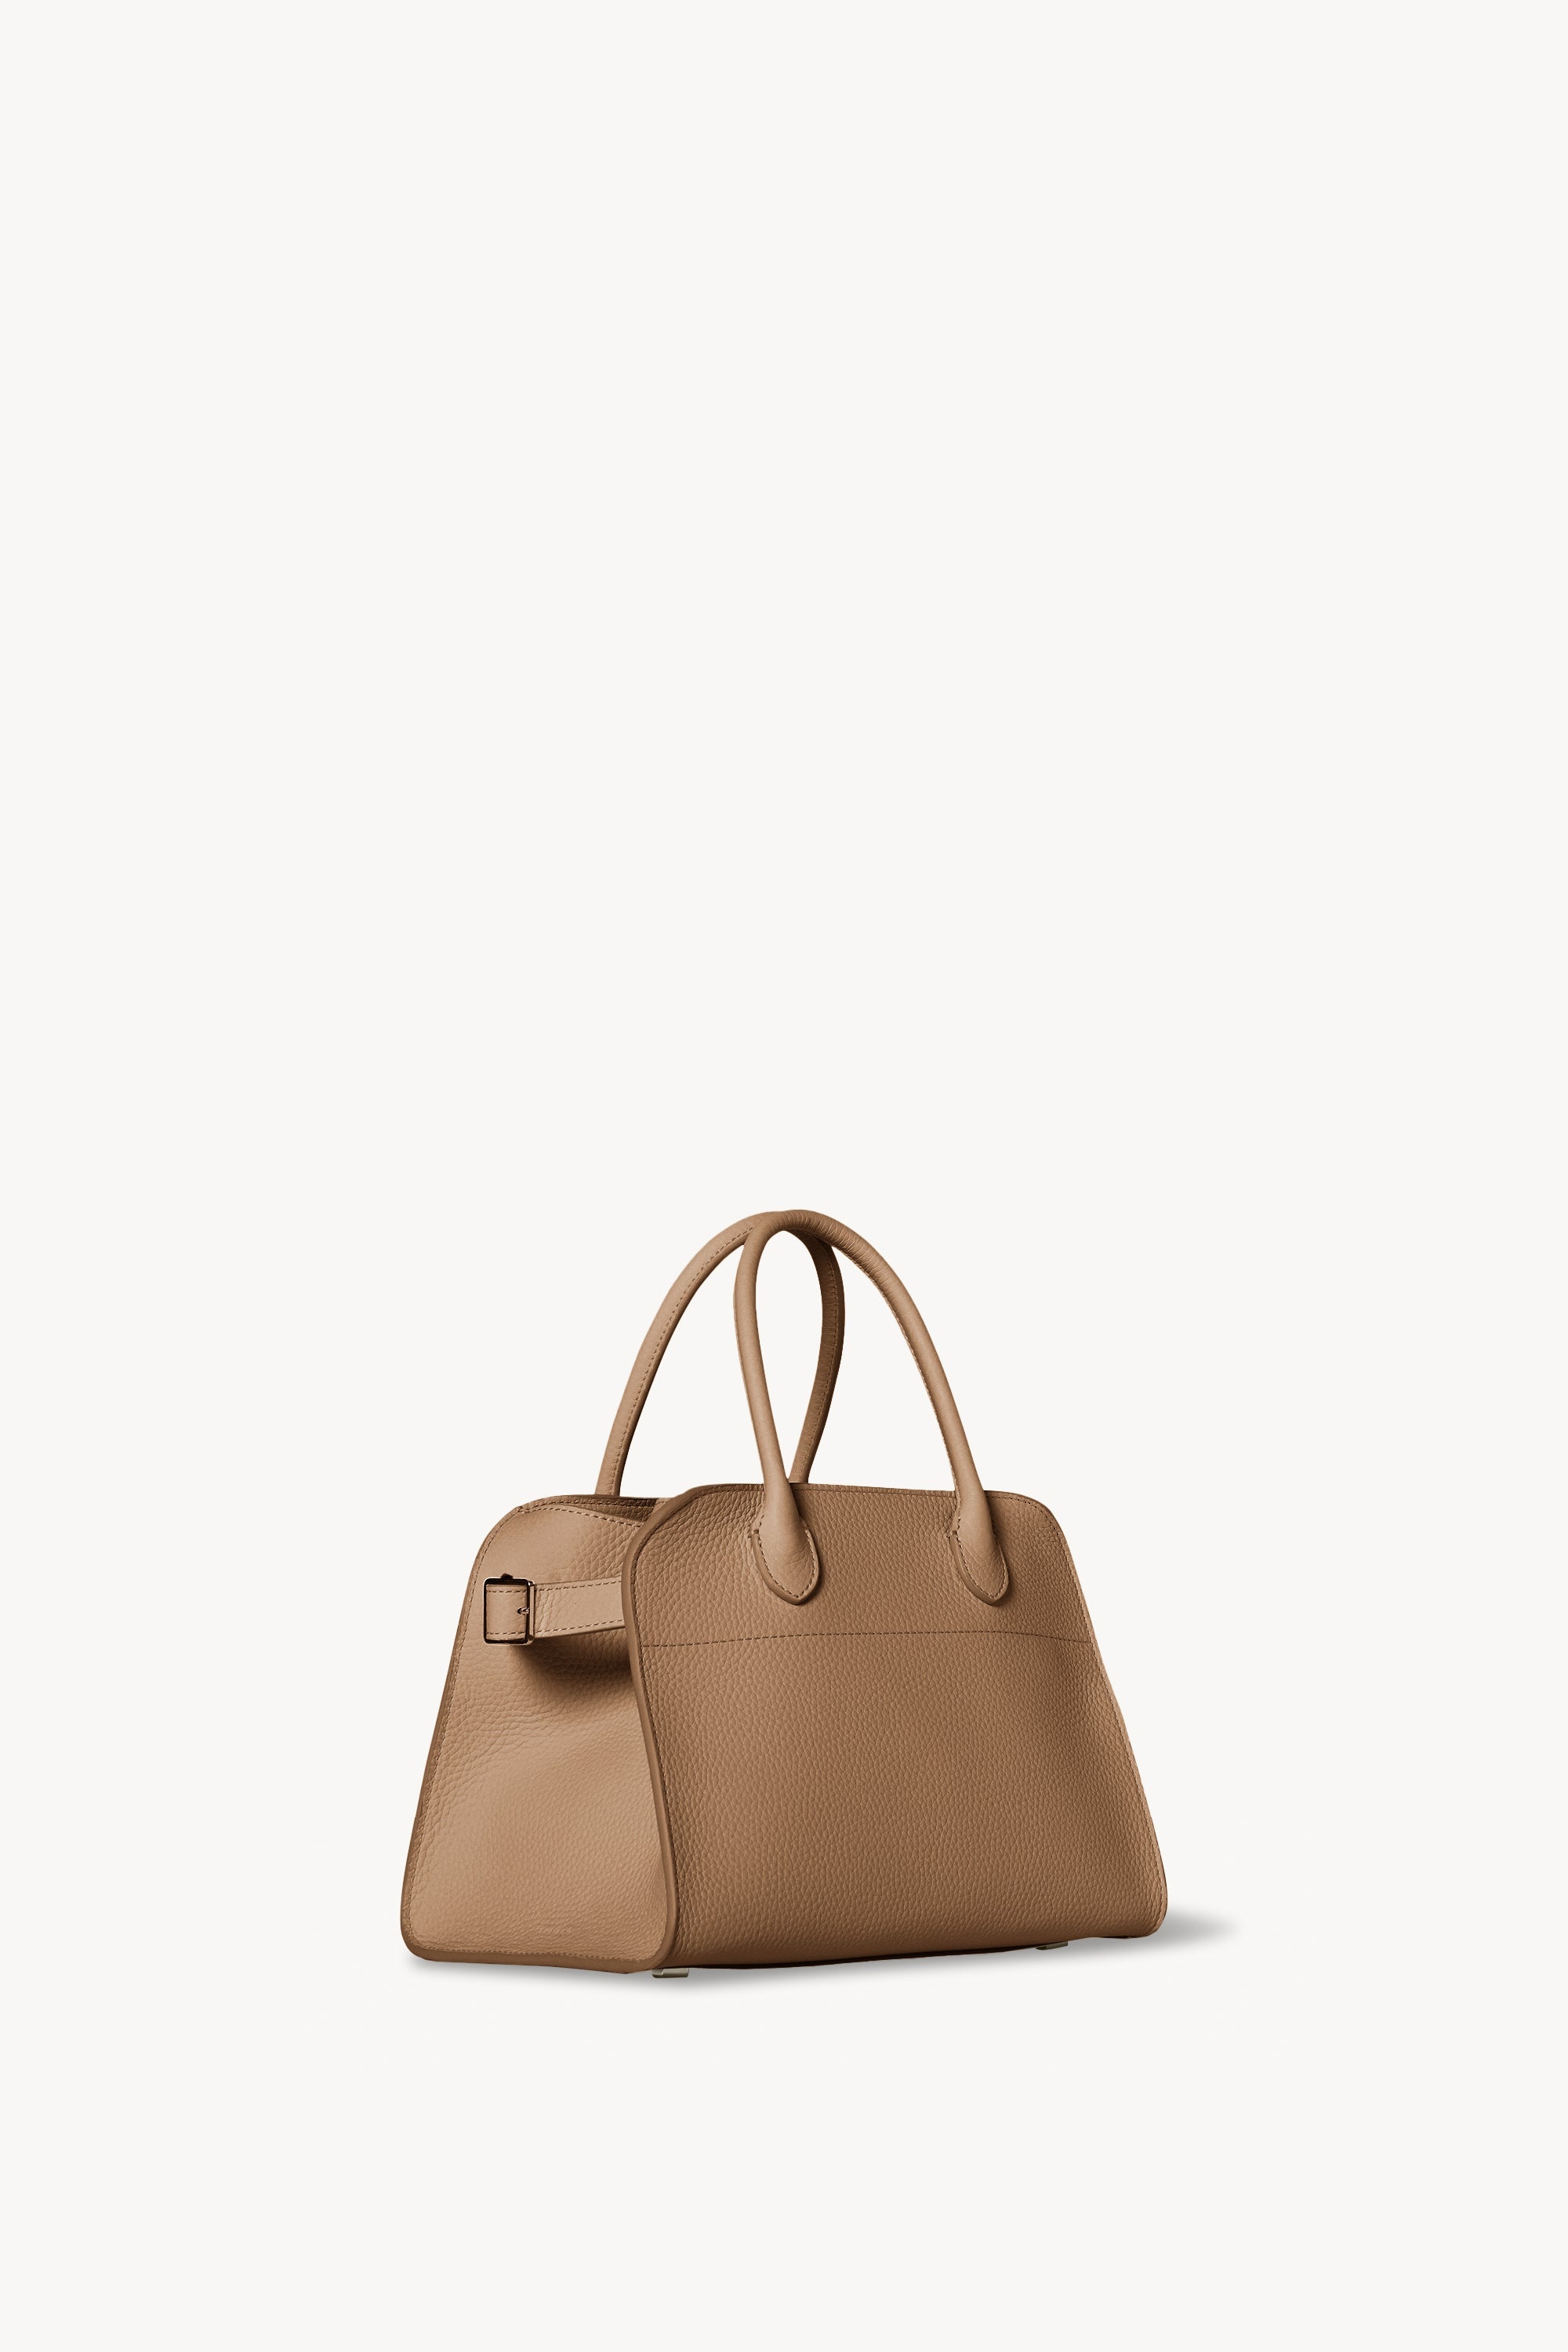 The Row Soft Margaux 10 Bag in Leather | REVERSIBLE